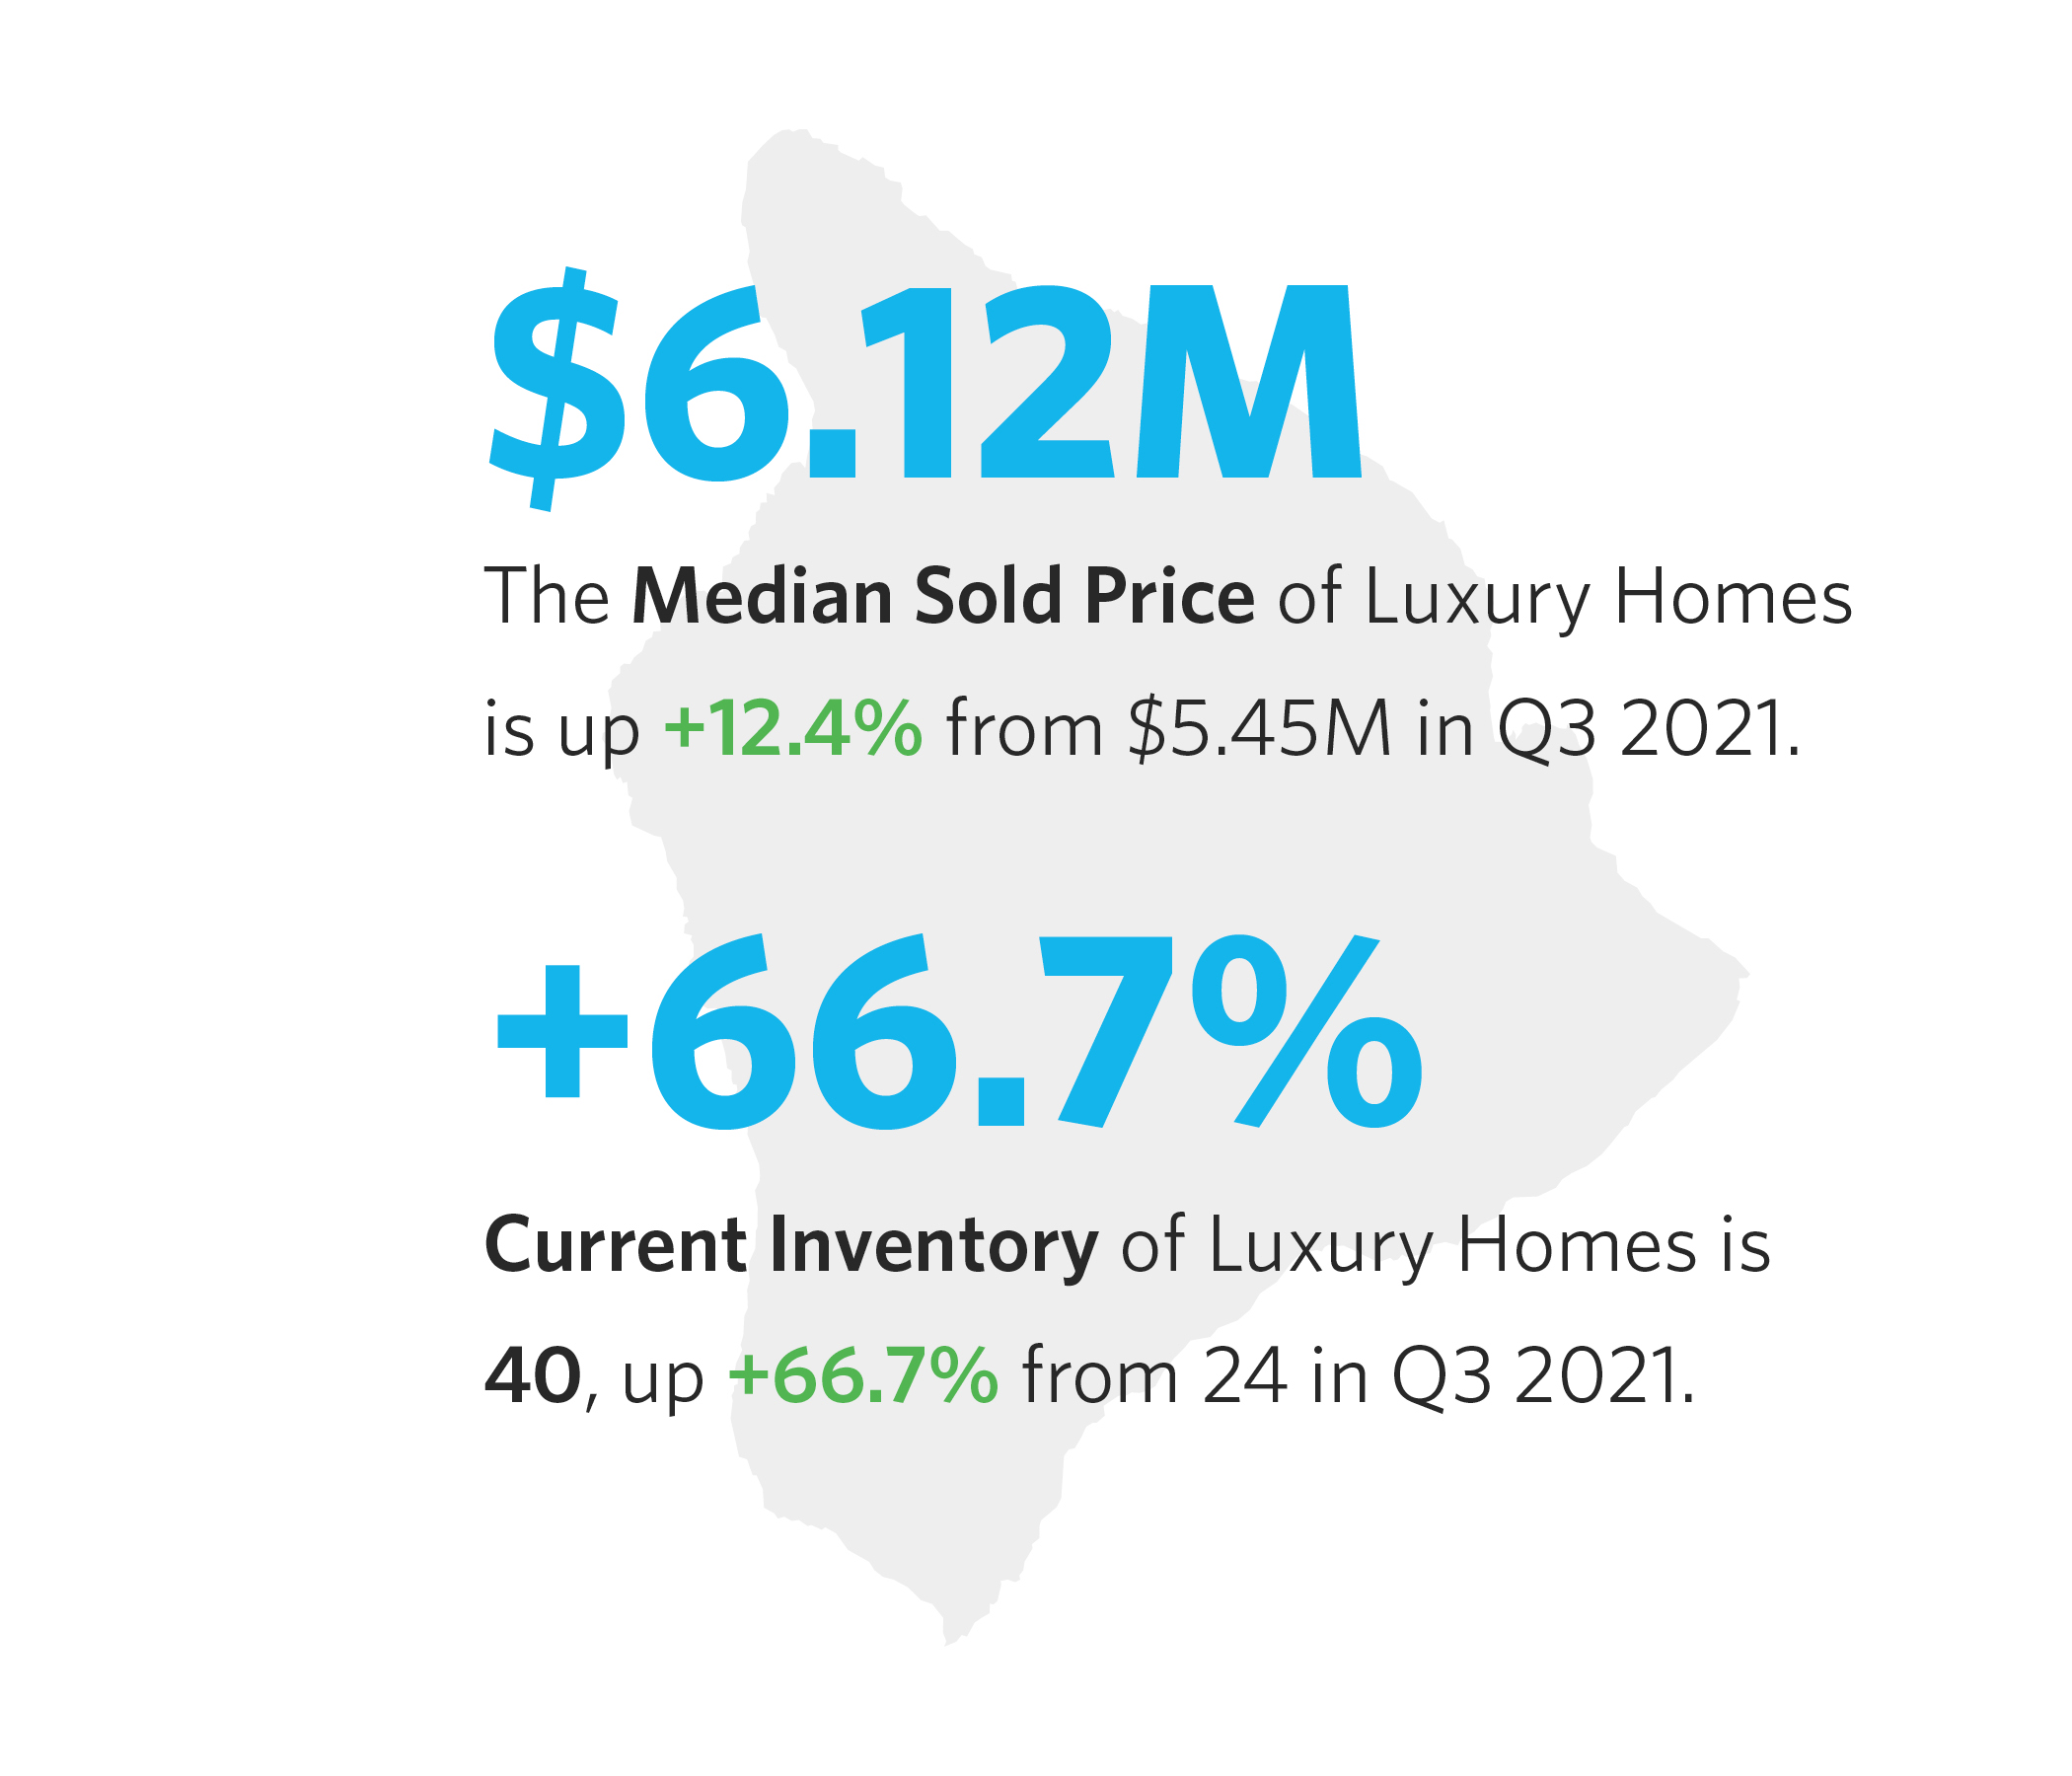 median sold price of luxury home up and inventory up